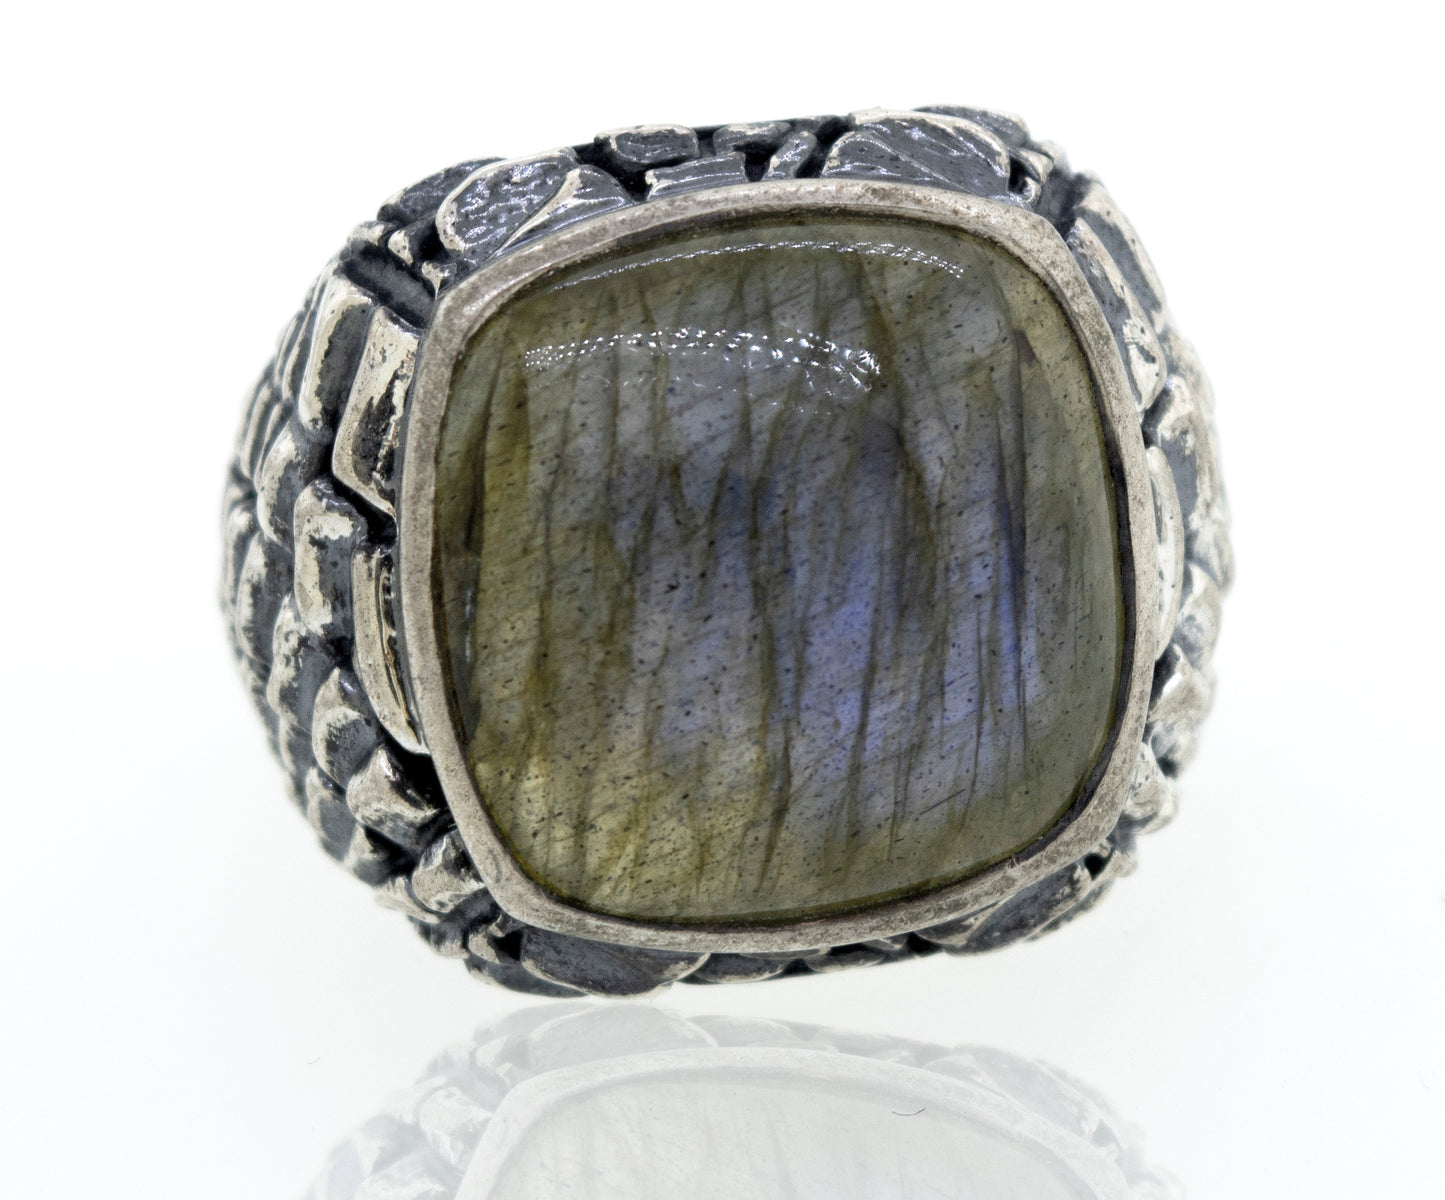 A minimalist sterling silver ring with a Heavy Signet Labradorite stone.